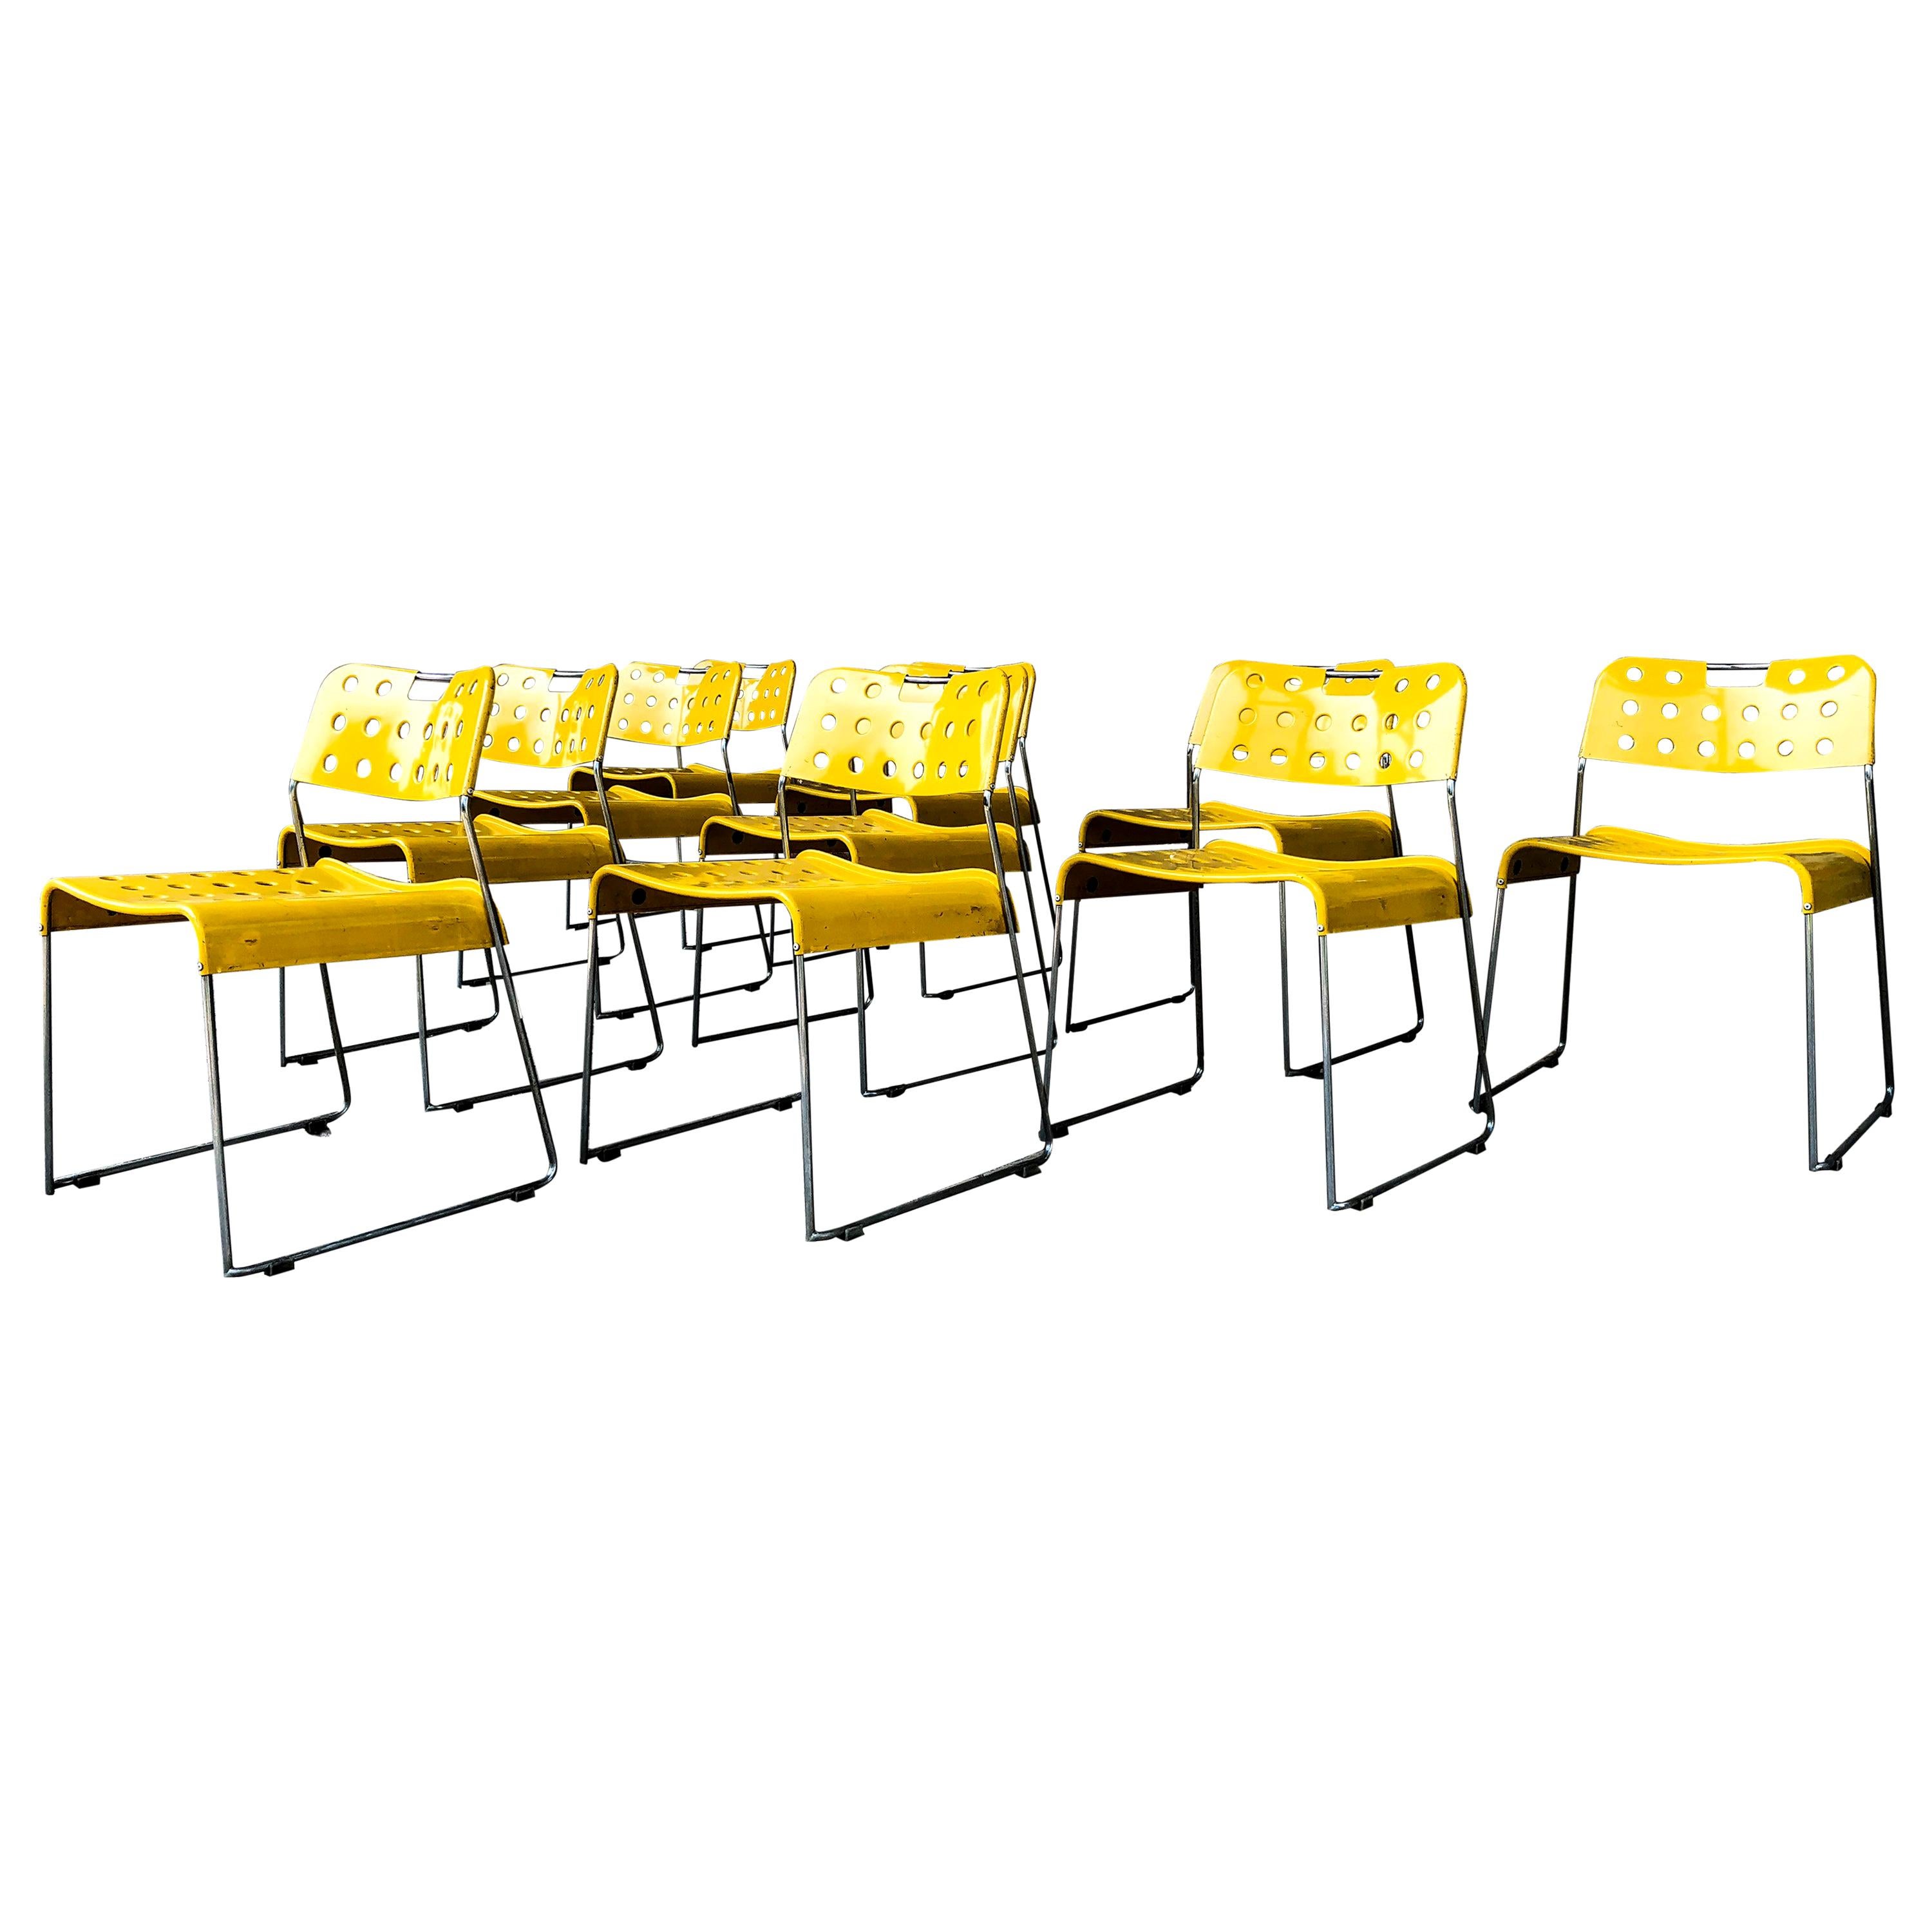 Rodney Kinsman Space Age Yellow Omstak Chair for Bieffeplast, 1971, Set of 10 For Sale